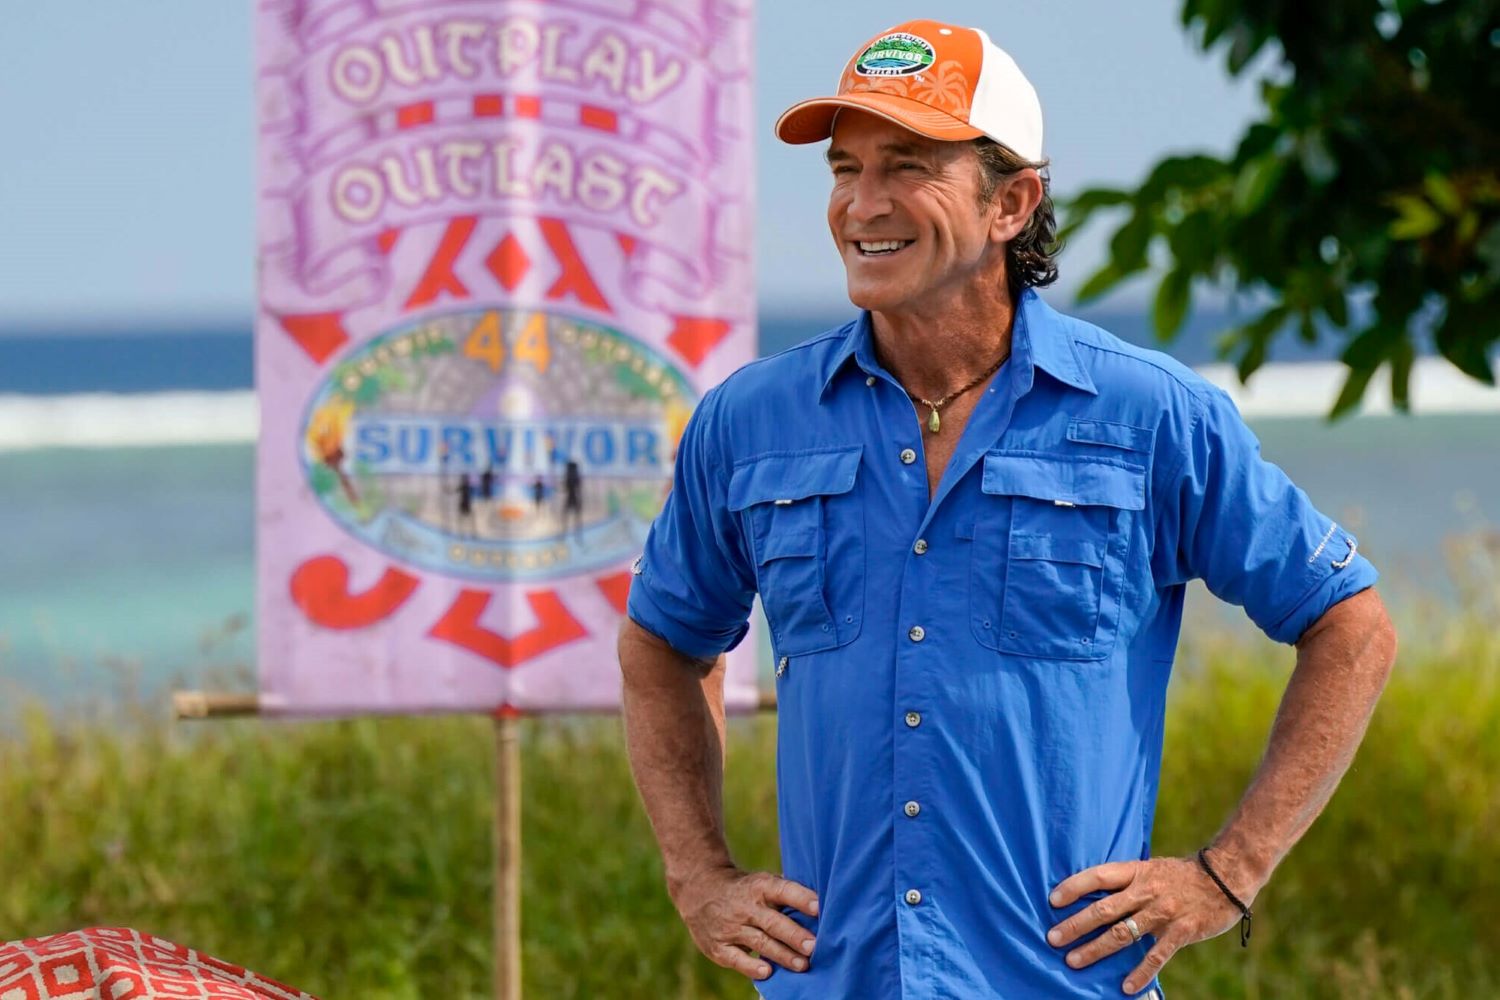 Jeff Probst, who has hosted every season of the CBS show 'Survivor,' wears a bright blue safari shirt and an orange and white 'Survivor' baseball cap.